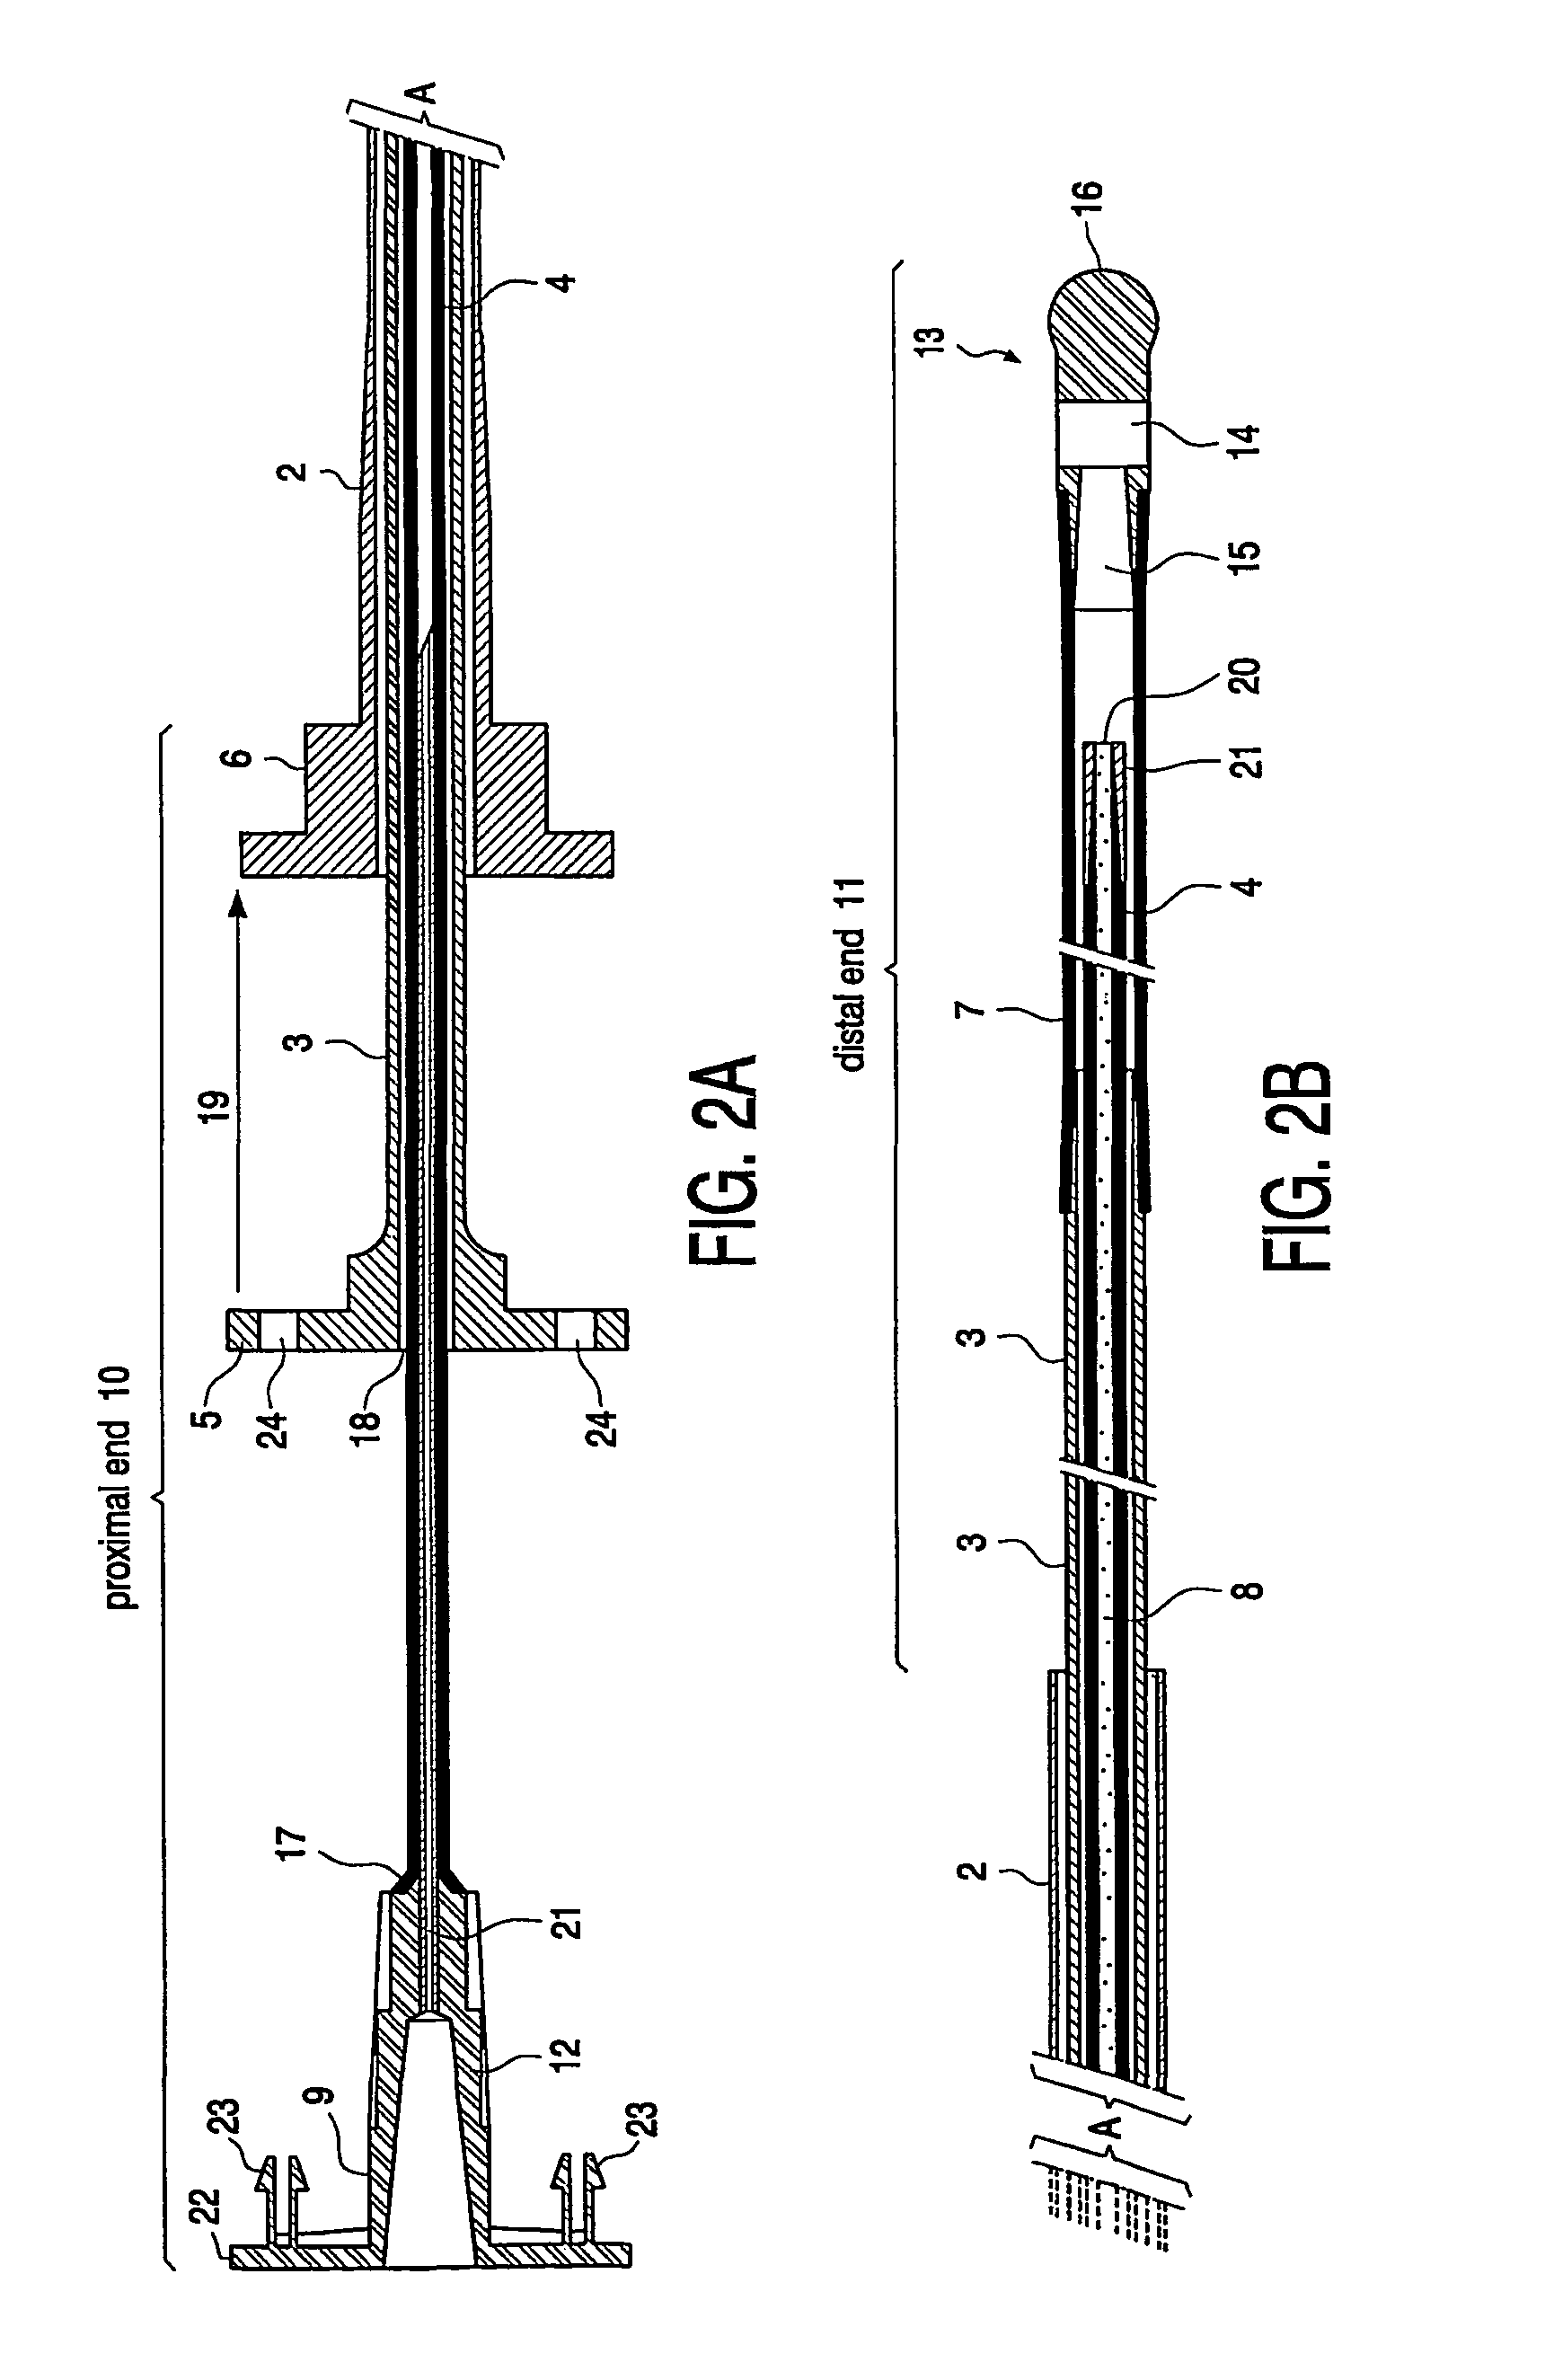 Device and method for artificial insemination of bovines and other animals